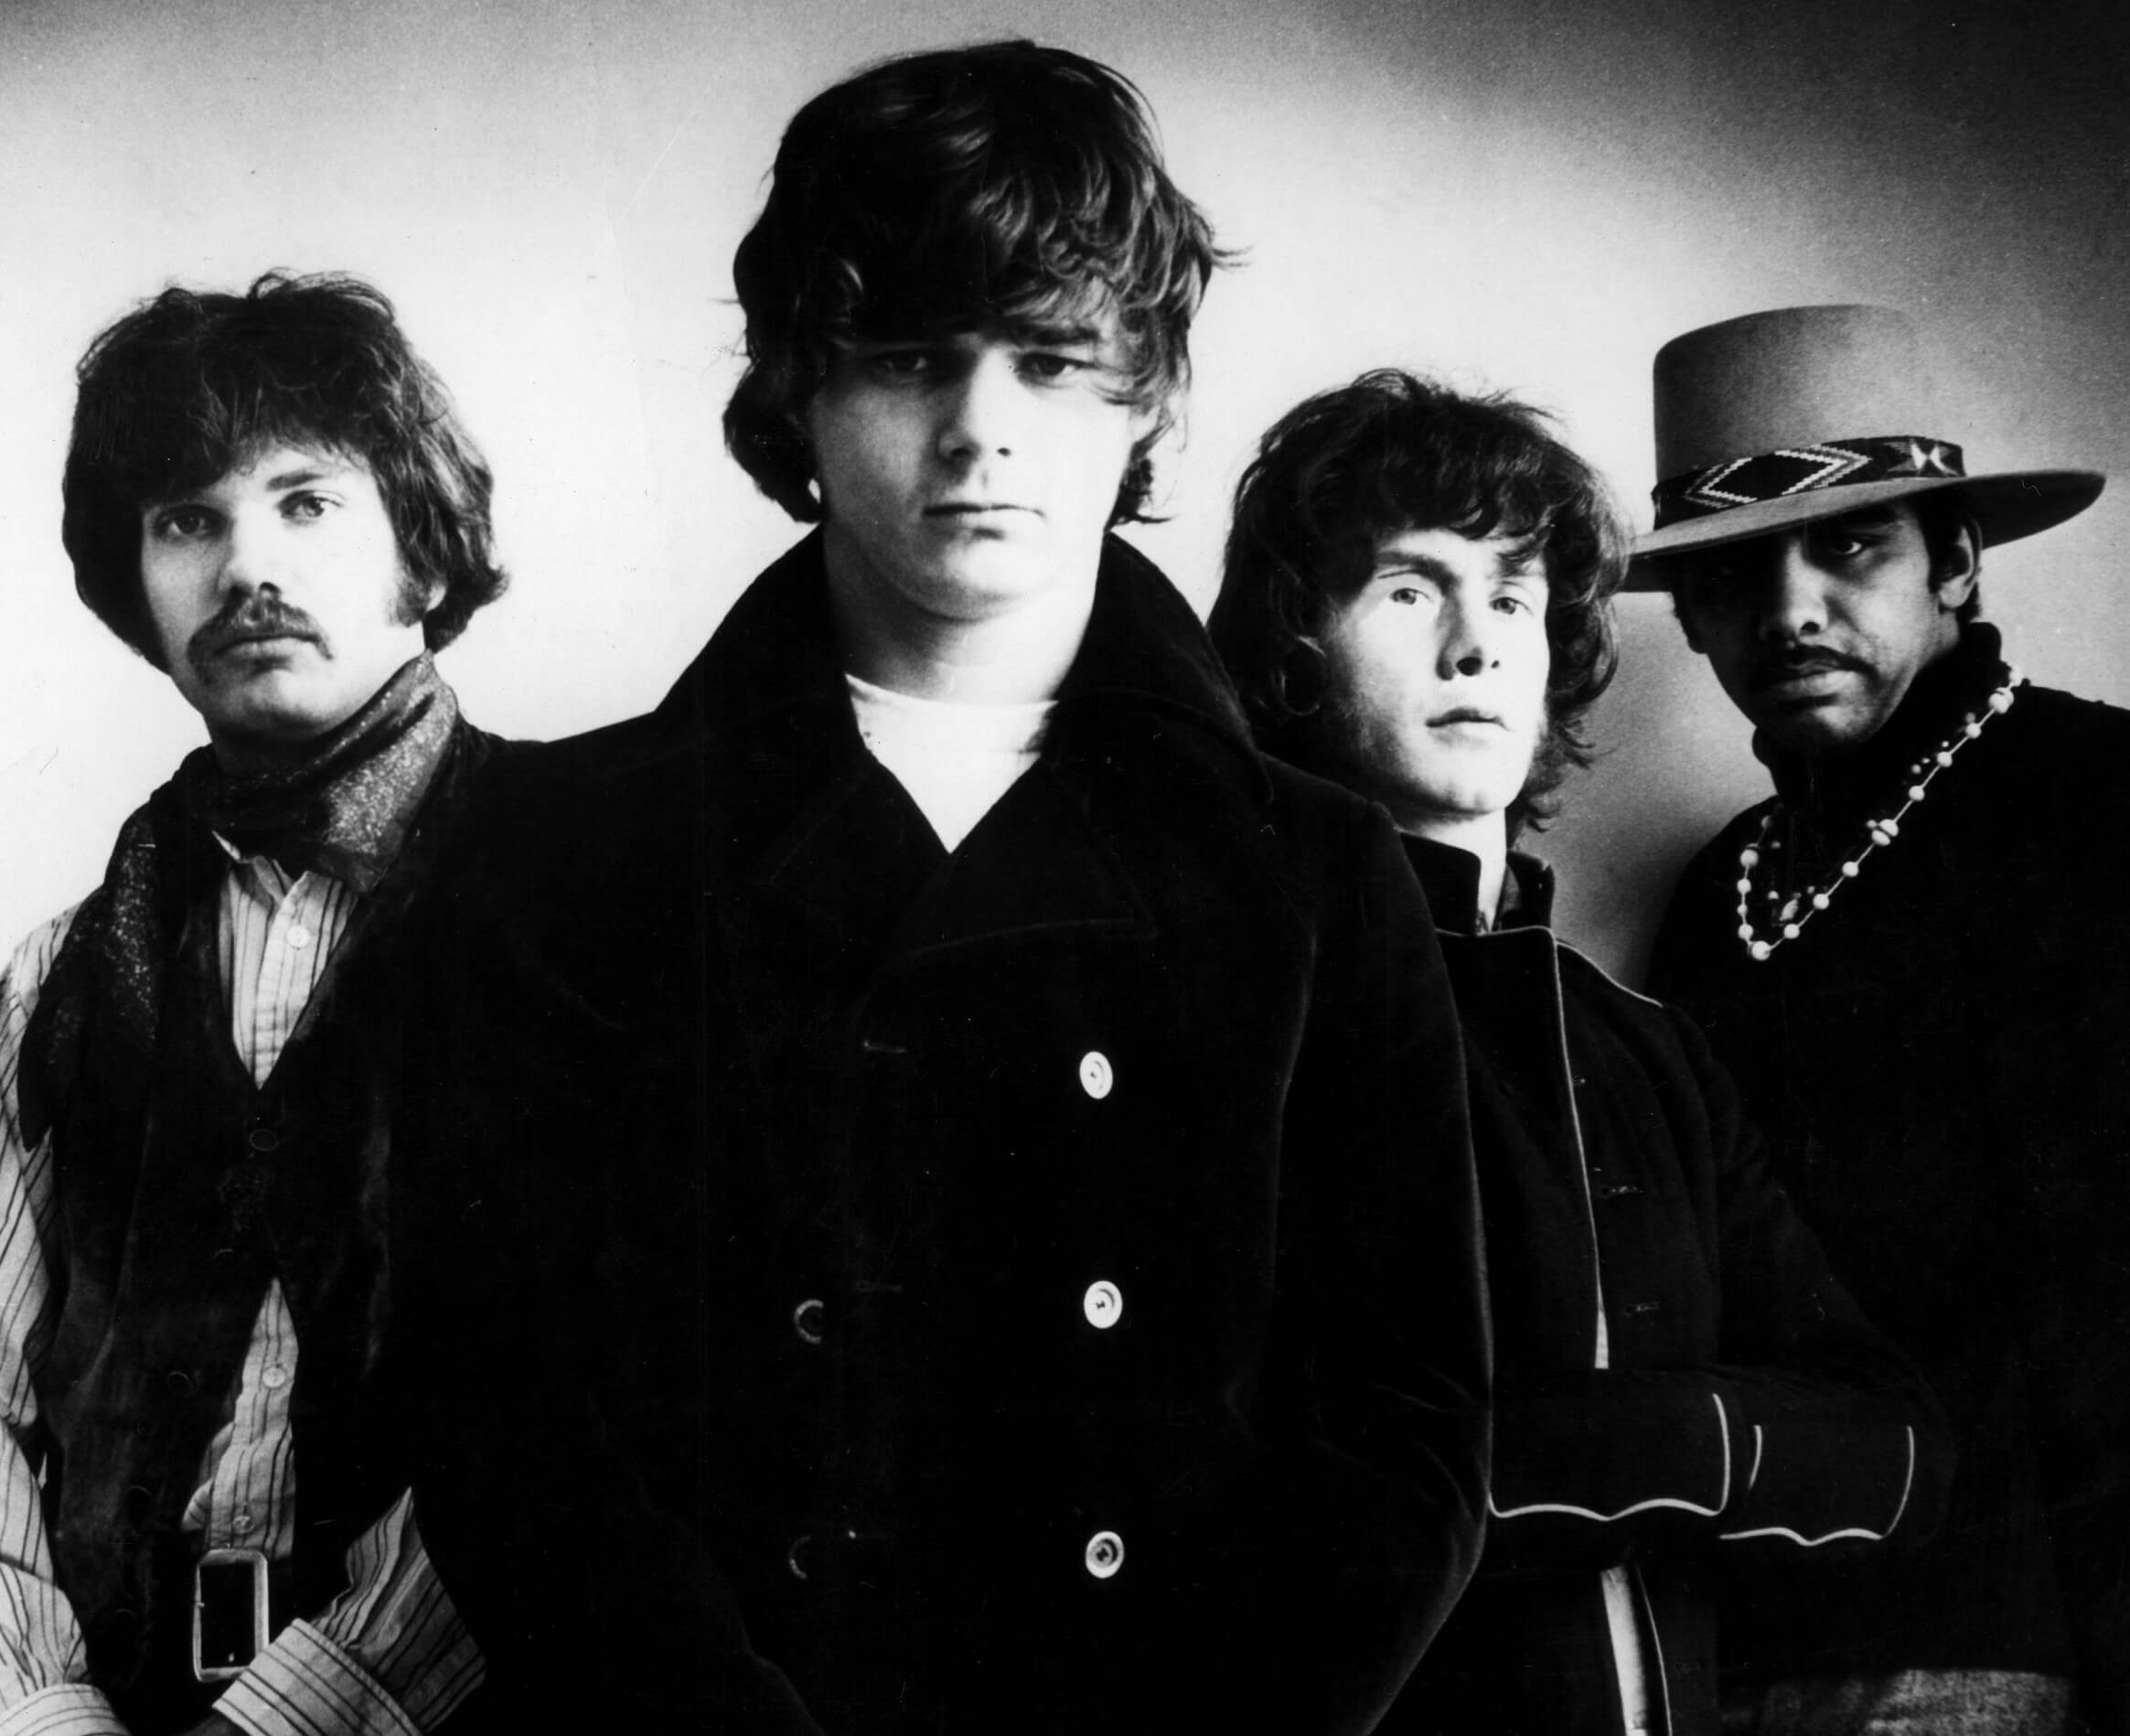 The Steve Miller Band in black-and-white